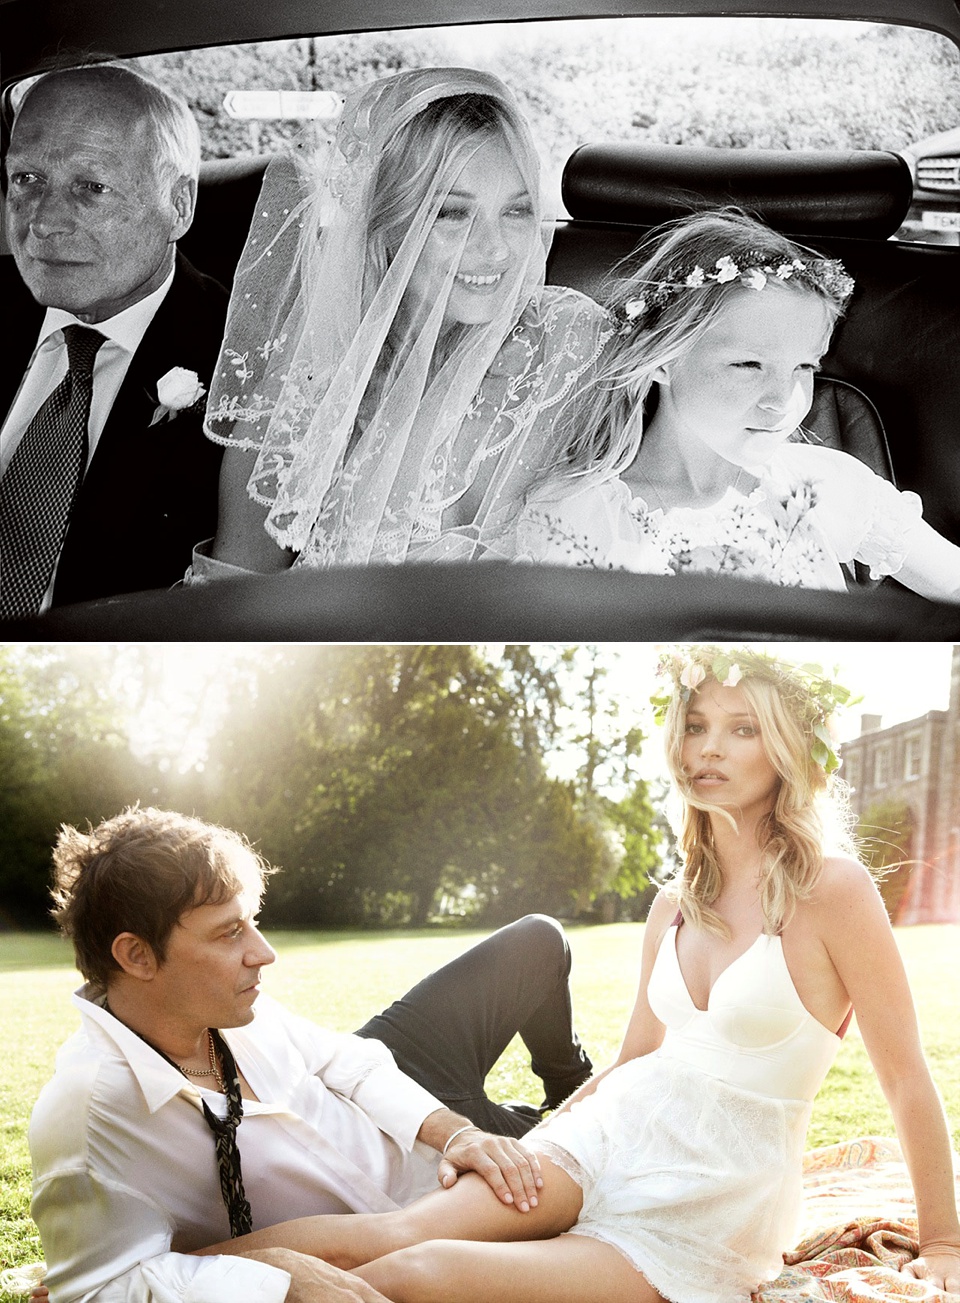 Kate Moss on the way to her wedding with her Father and daughter Lila, and Kate and her husband Jamie on their wedding day.